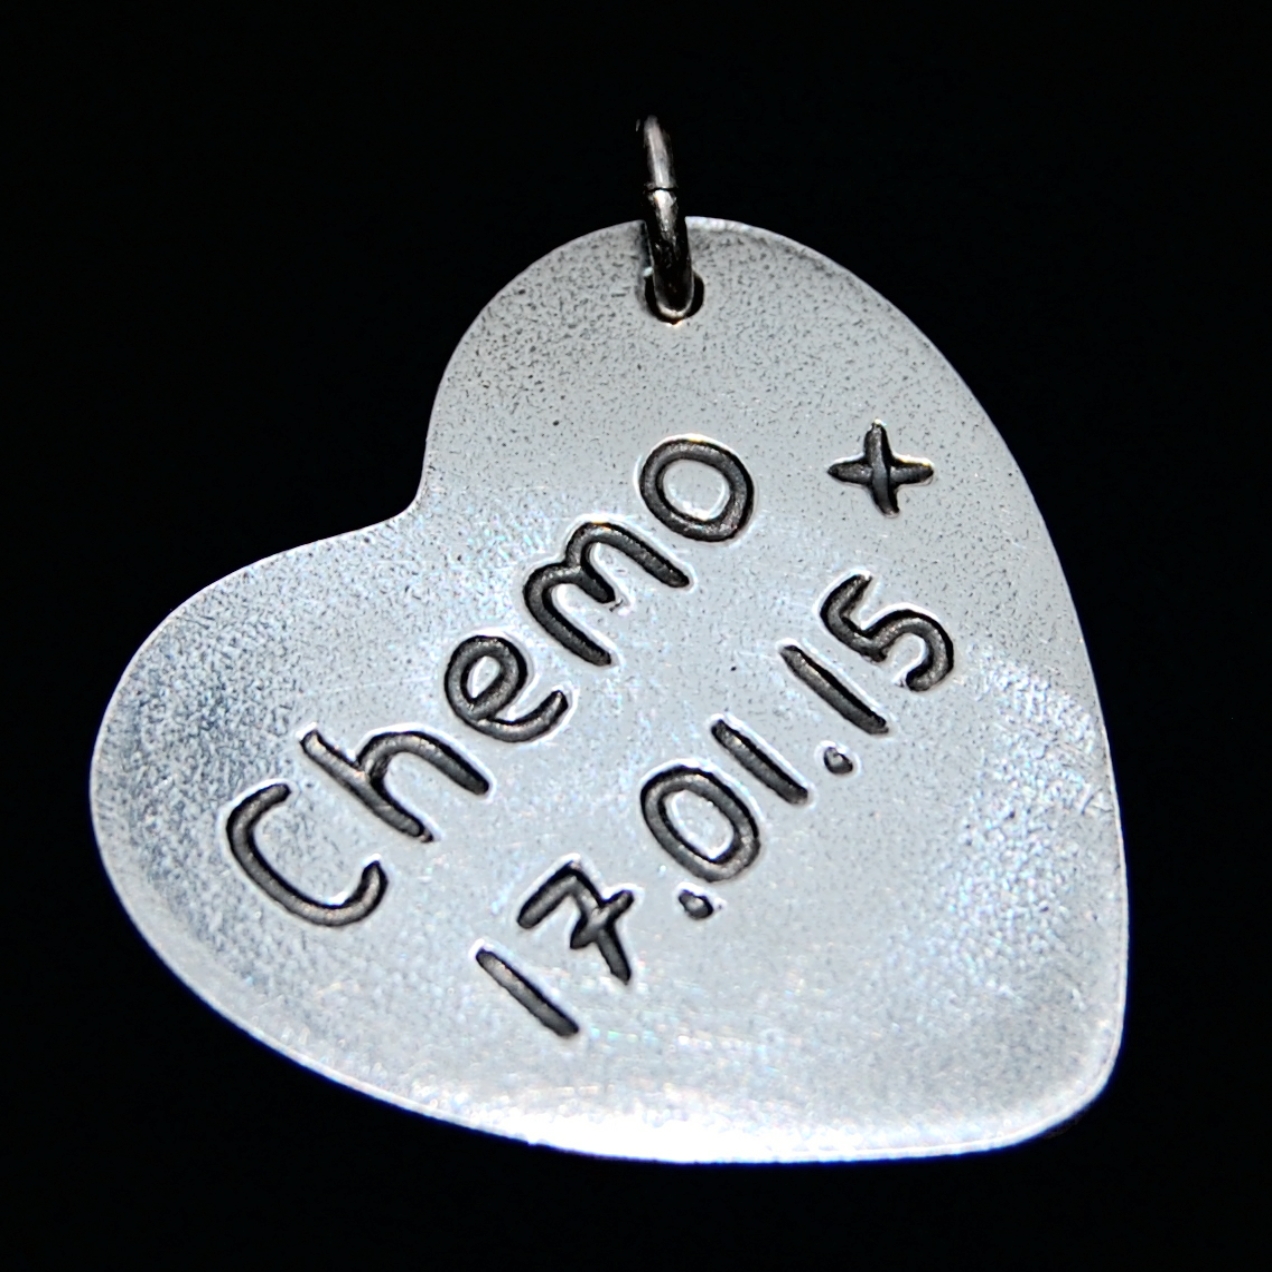 Name and special date inscribed on the back of a large heart charm.